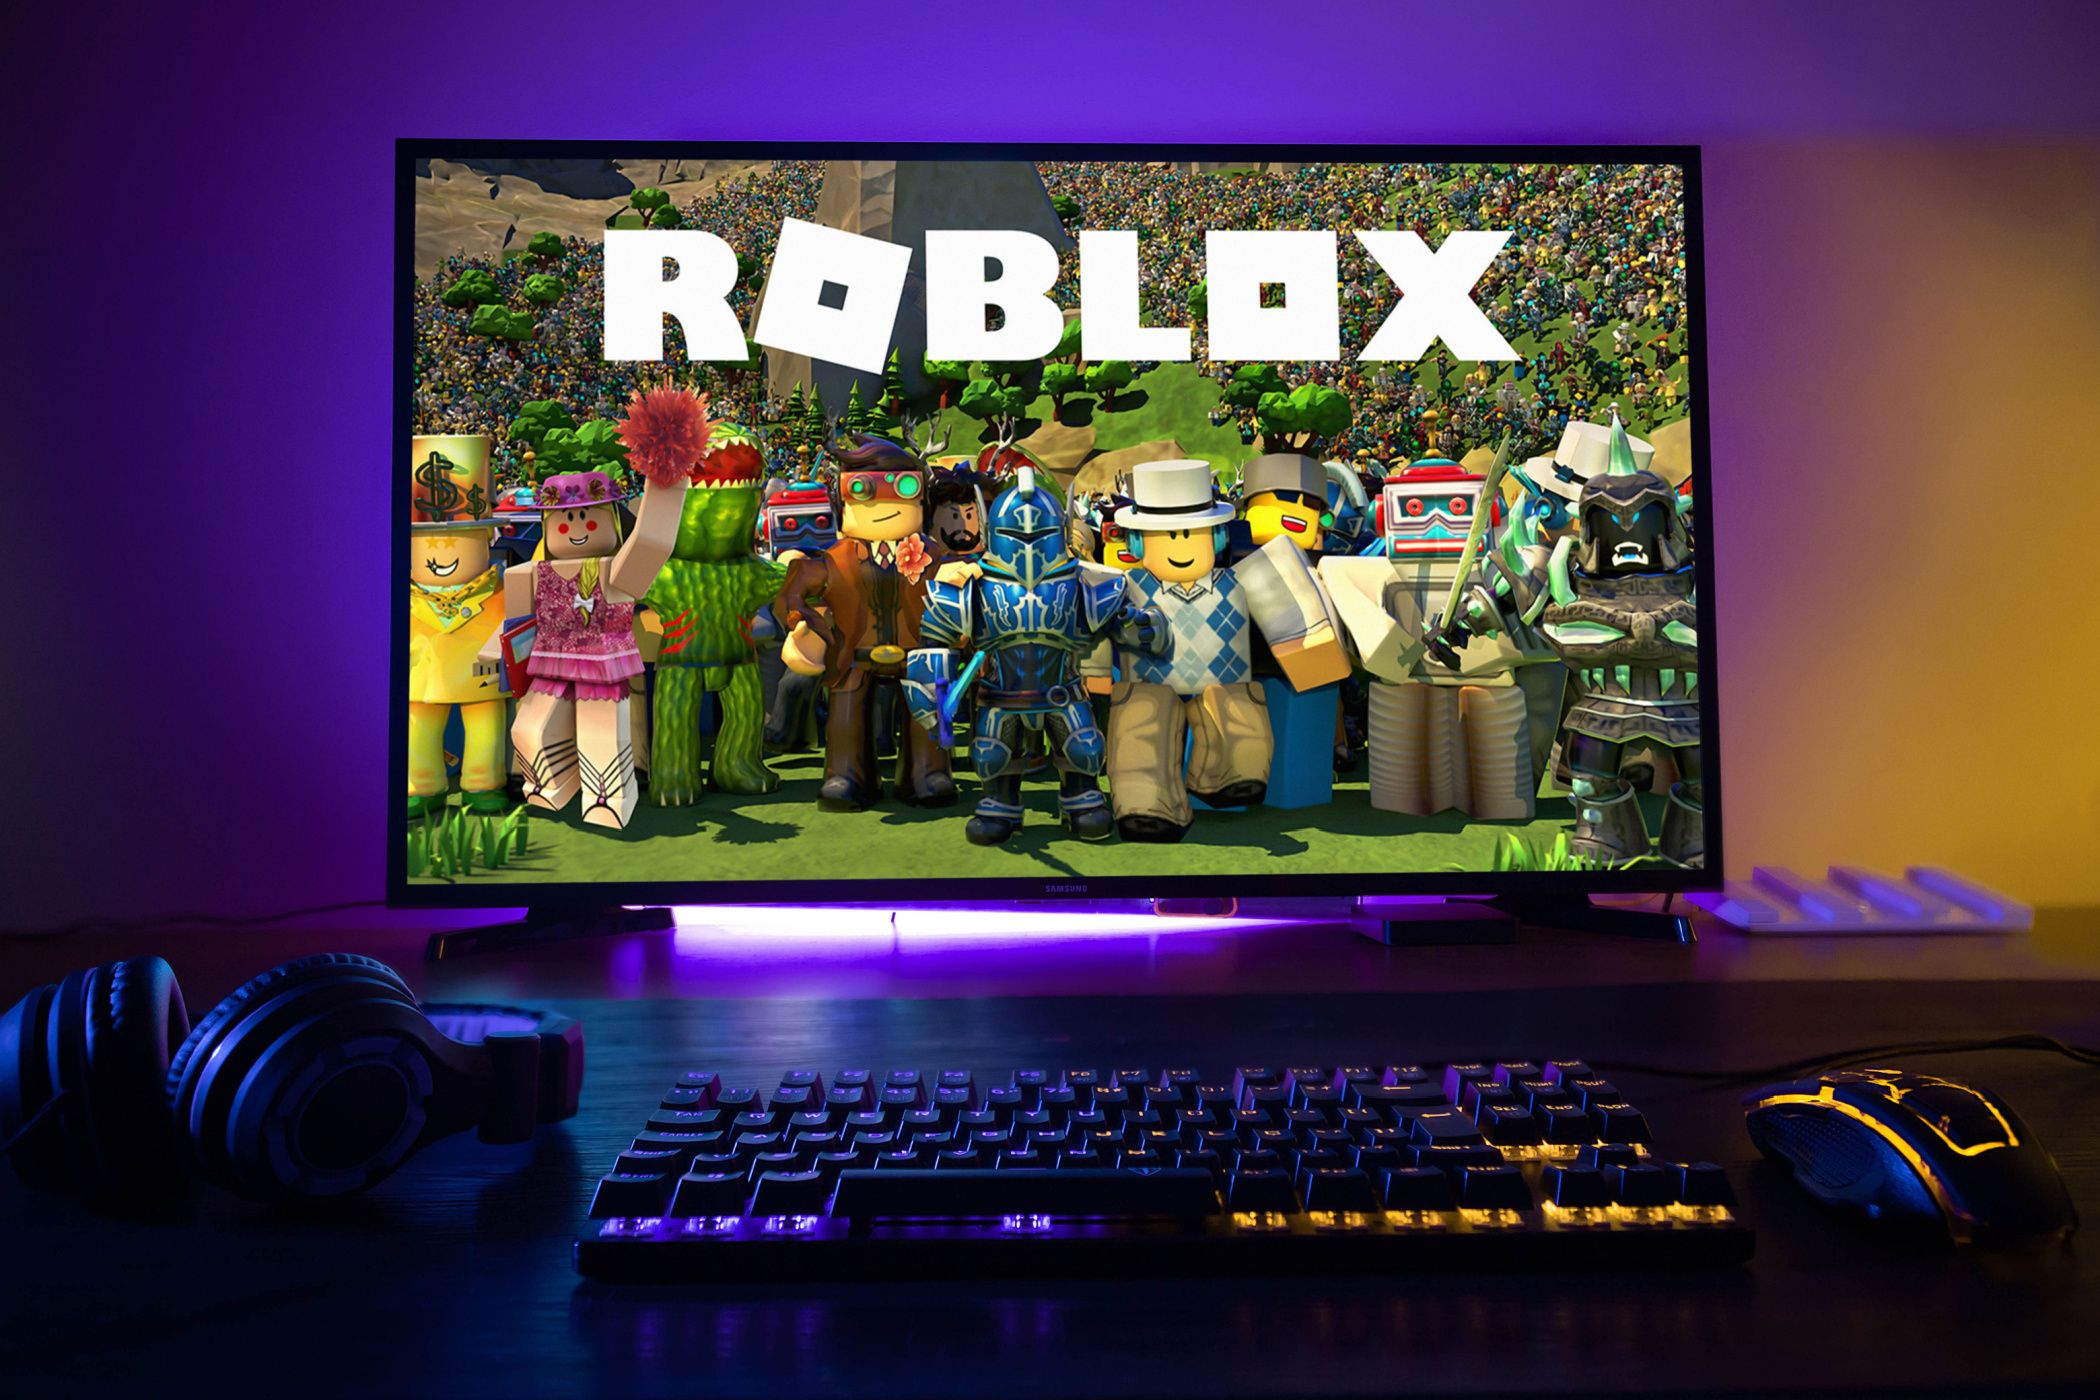 How To Fix Roblox Crash - An Unexpected Error Occurred And Roblox